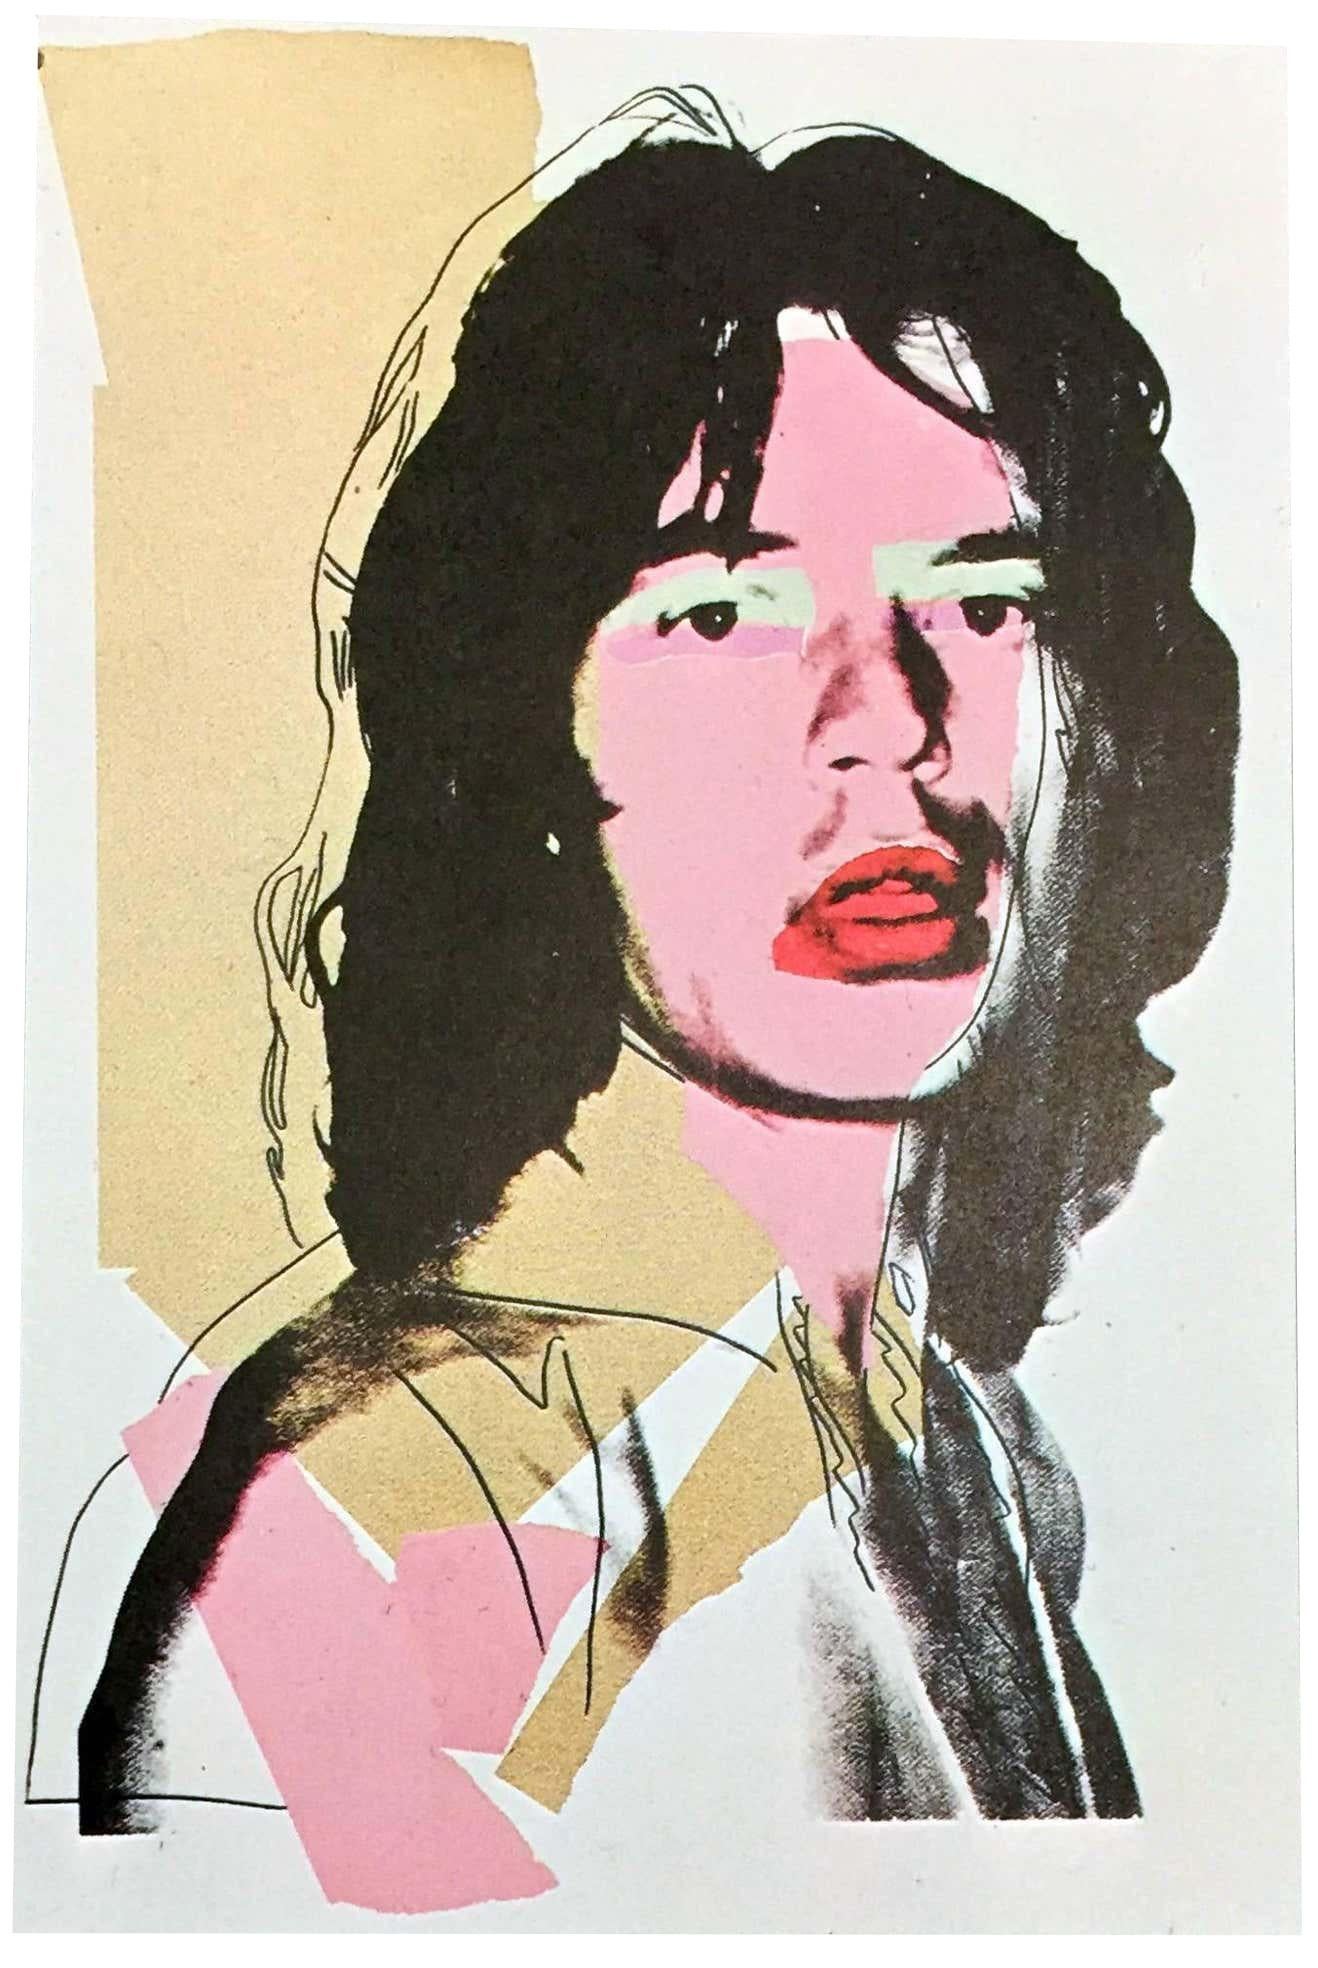 Andy Warhol Mick Jagger, Leo Castelli gallery 1975:
A stunning set of ten announcement cards published by Castelli Graphics in 1975 to advertise the forthcoming portfolio of ten silkscreen prints by Andy Warhol of Mick Jagger, 1975. The very first